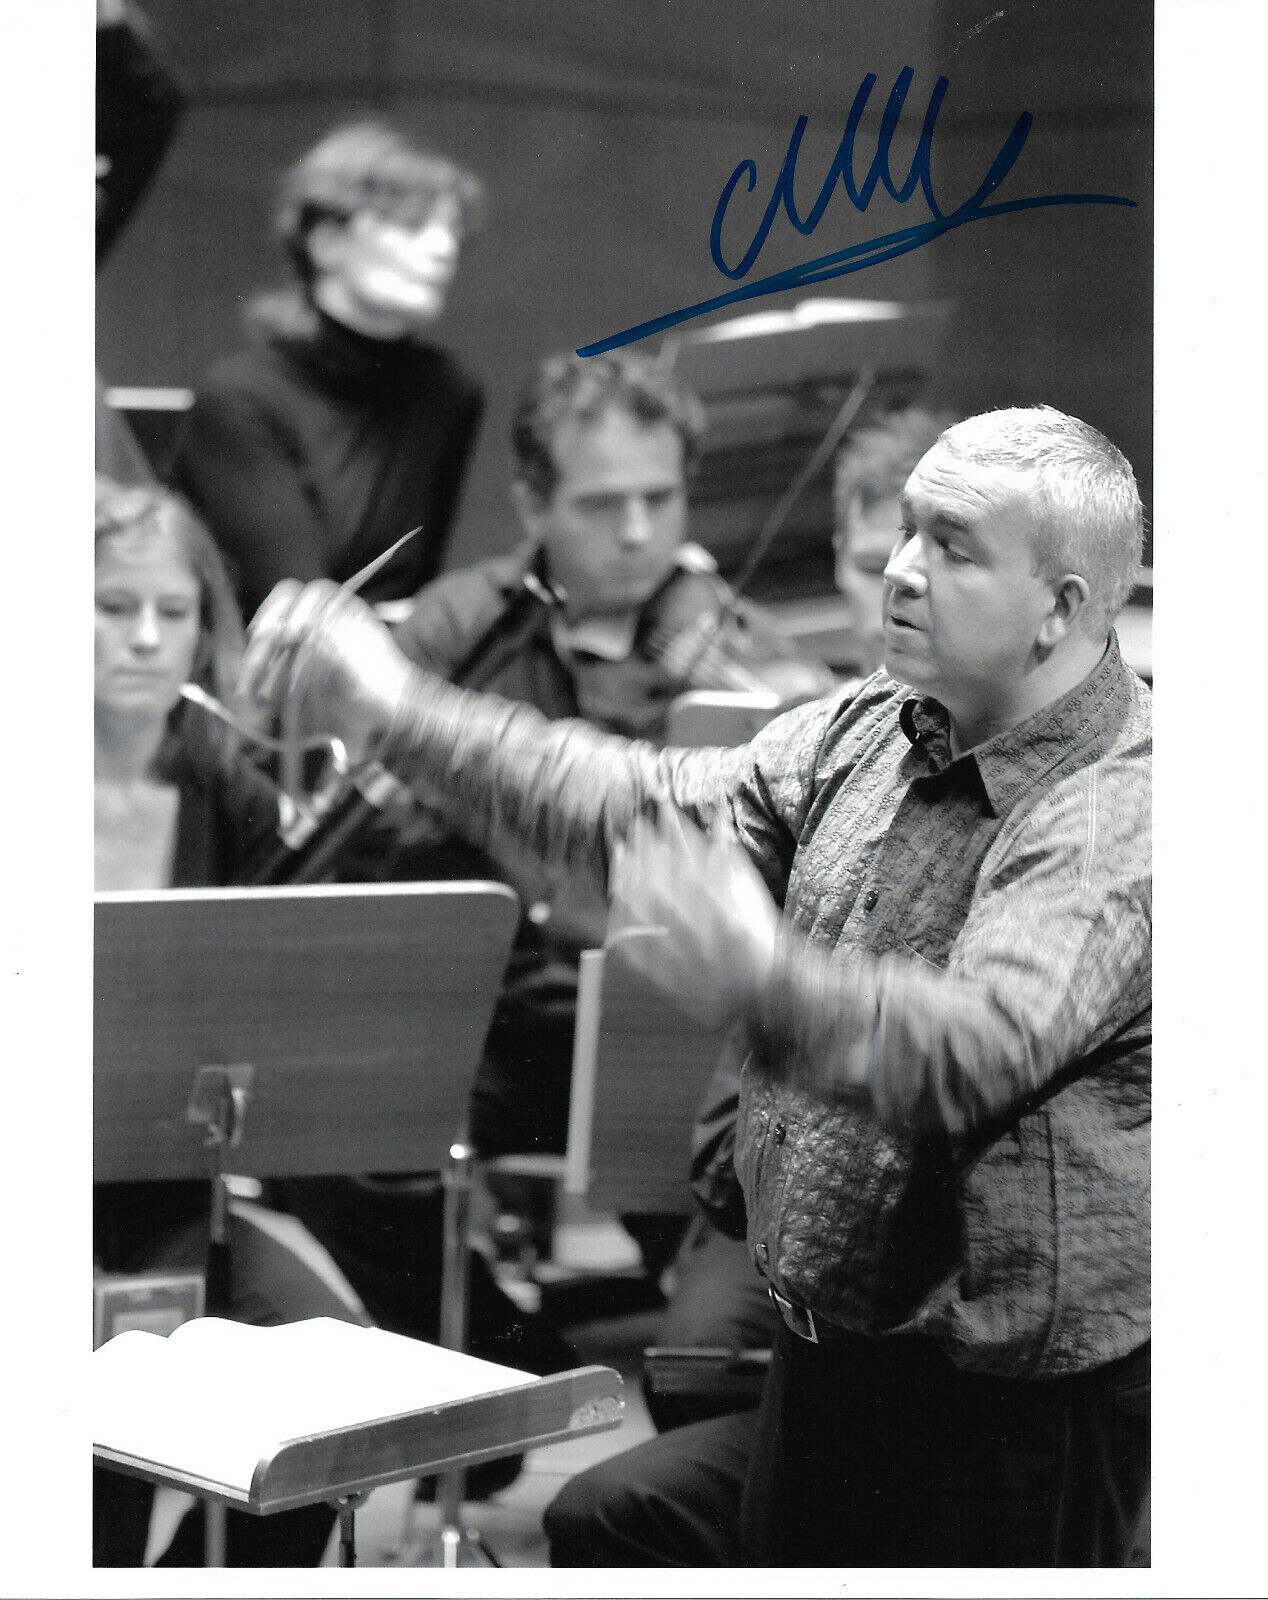 Marc Minkowski Conductor signed 8x10 inch Photo Poster painting autograph